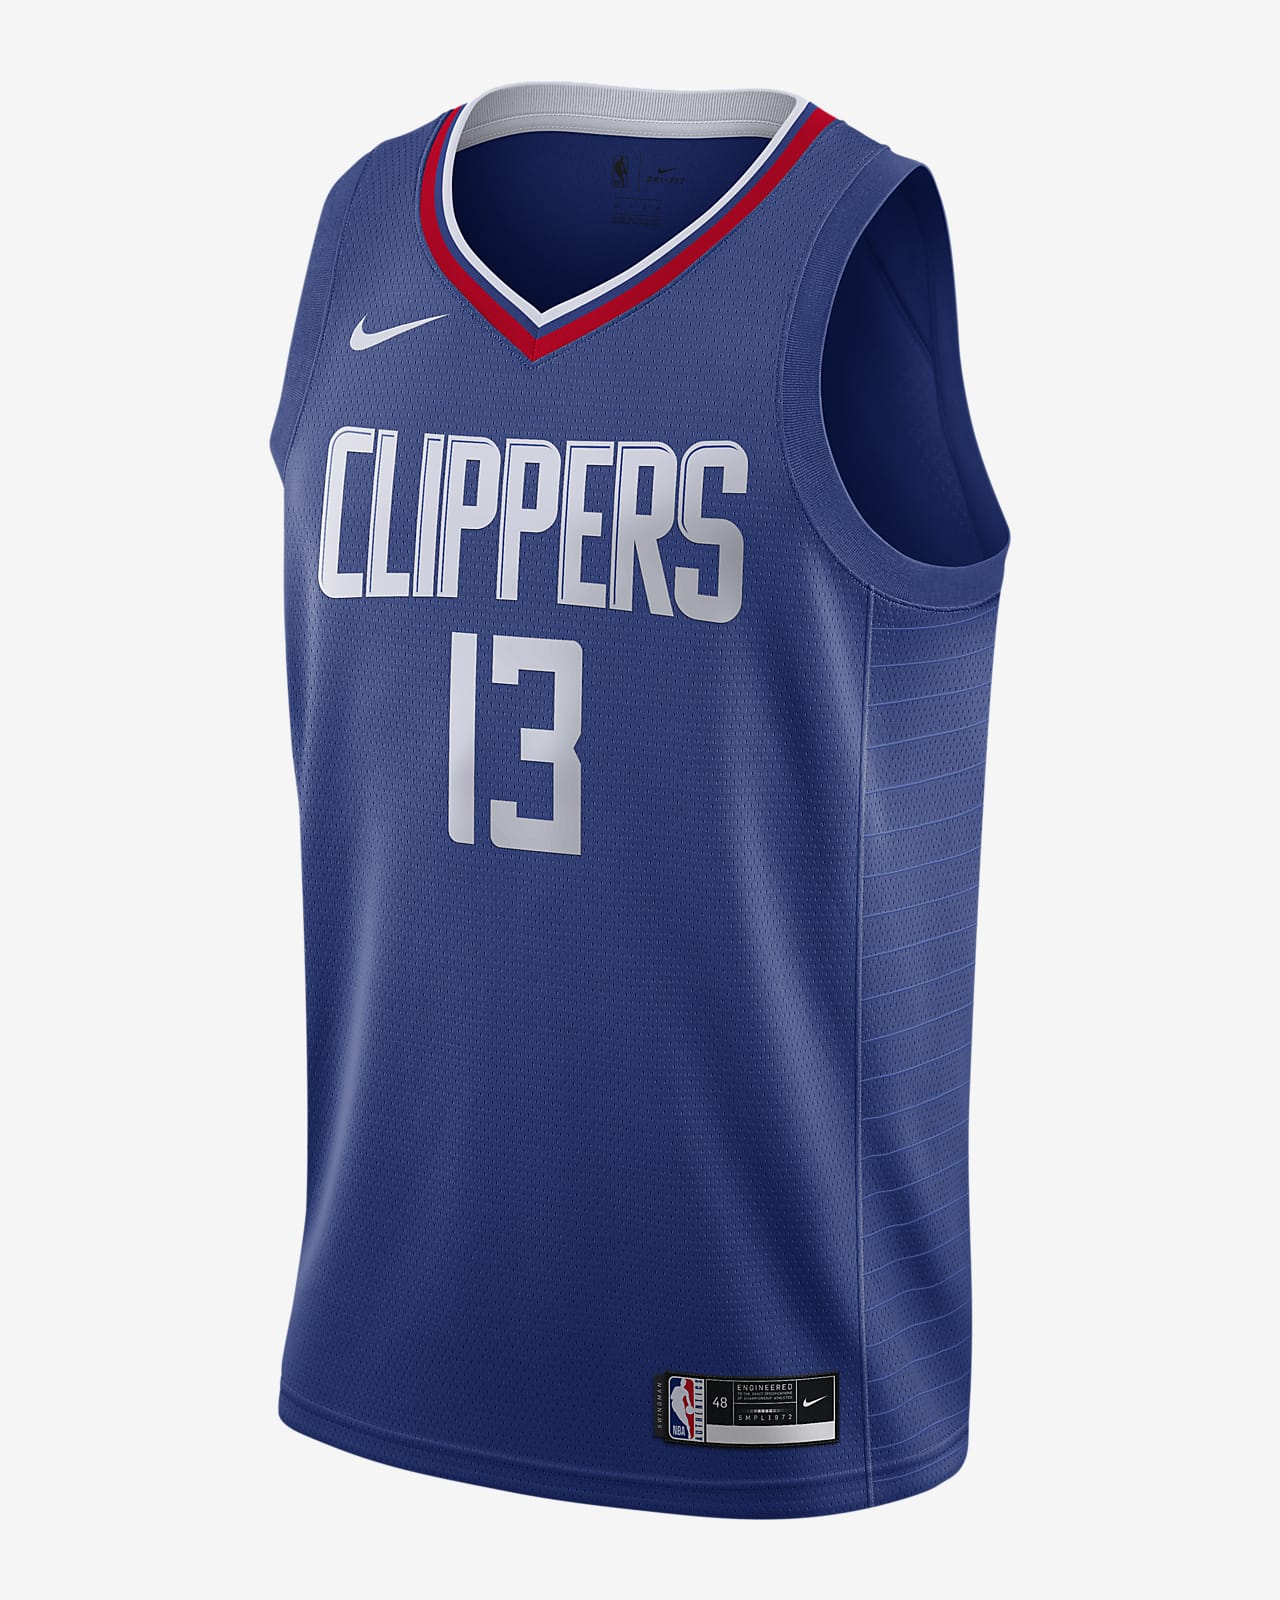 paul george authentic jersey